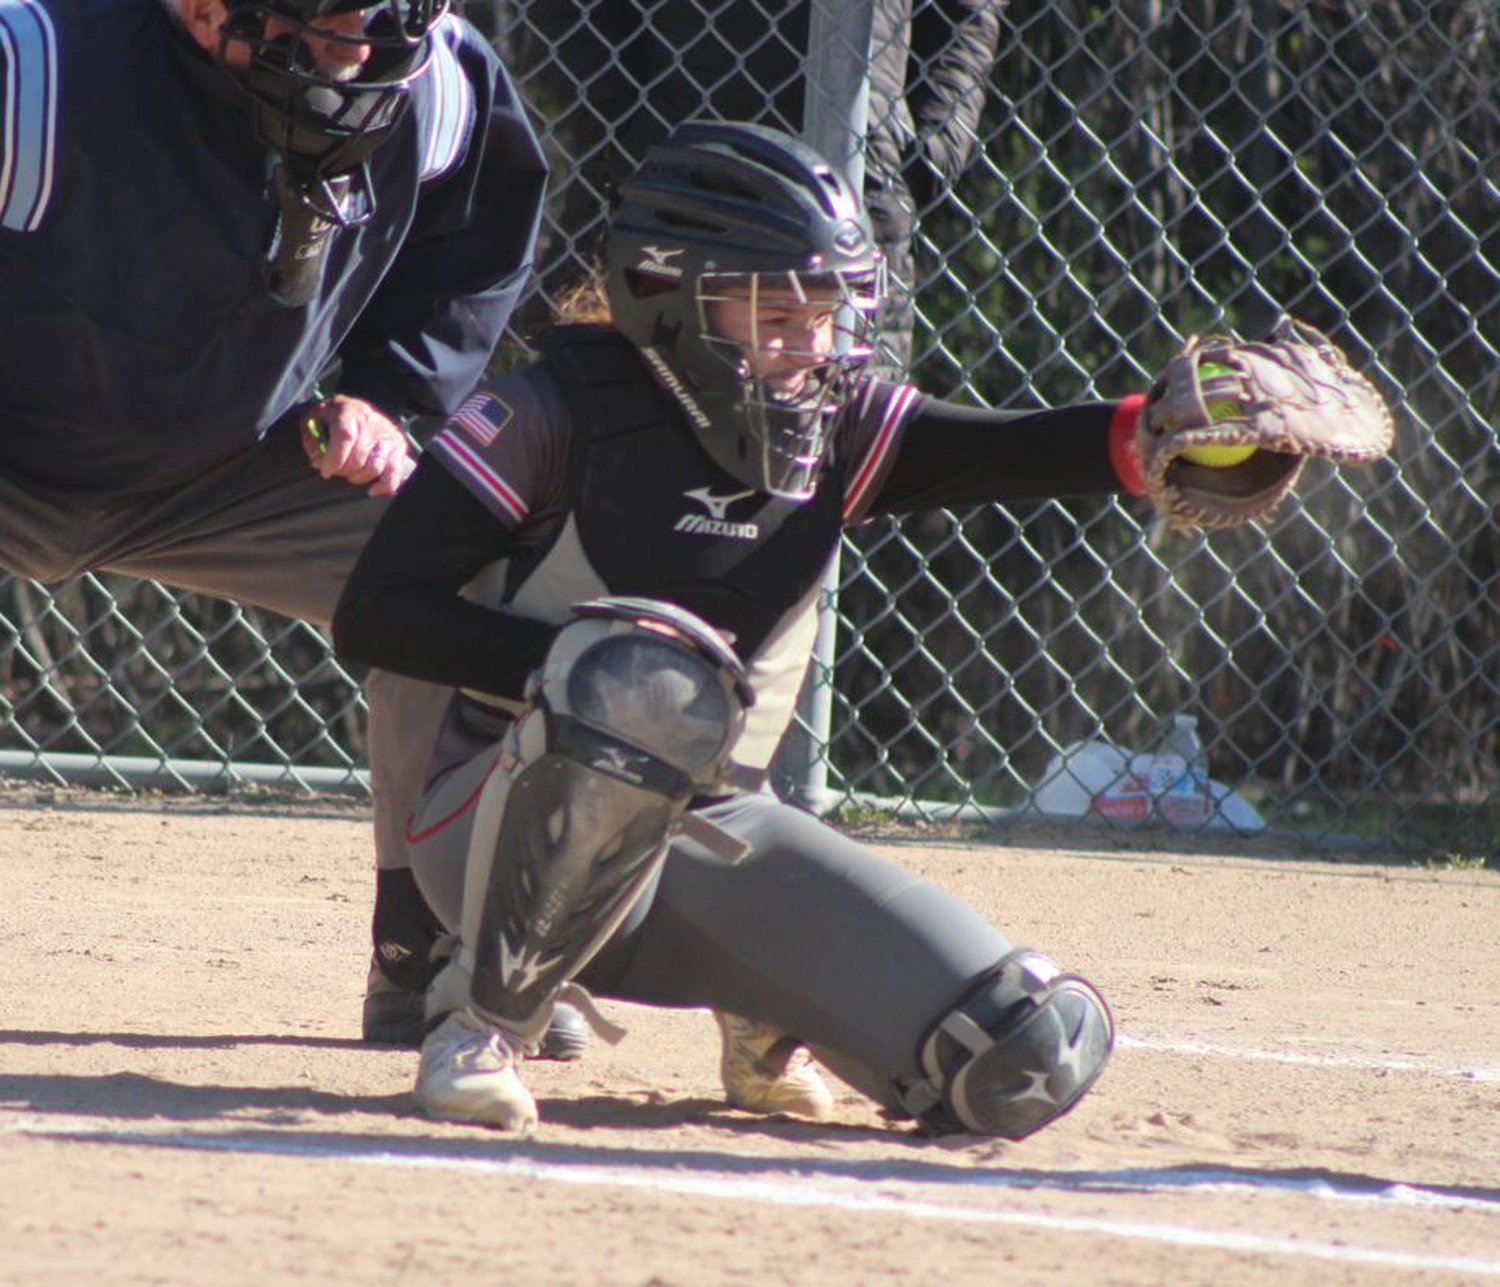 BEHIND THE PLATE: West catcher Emily Eastman.